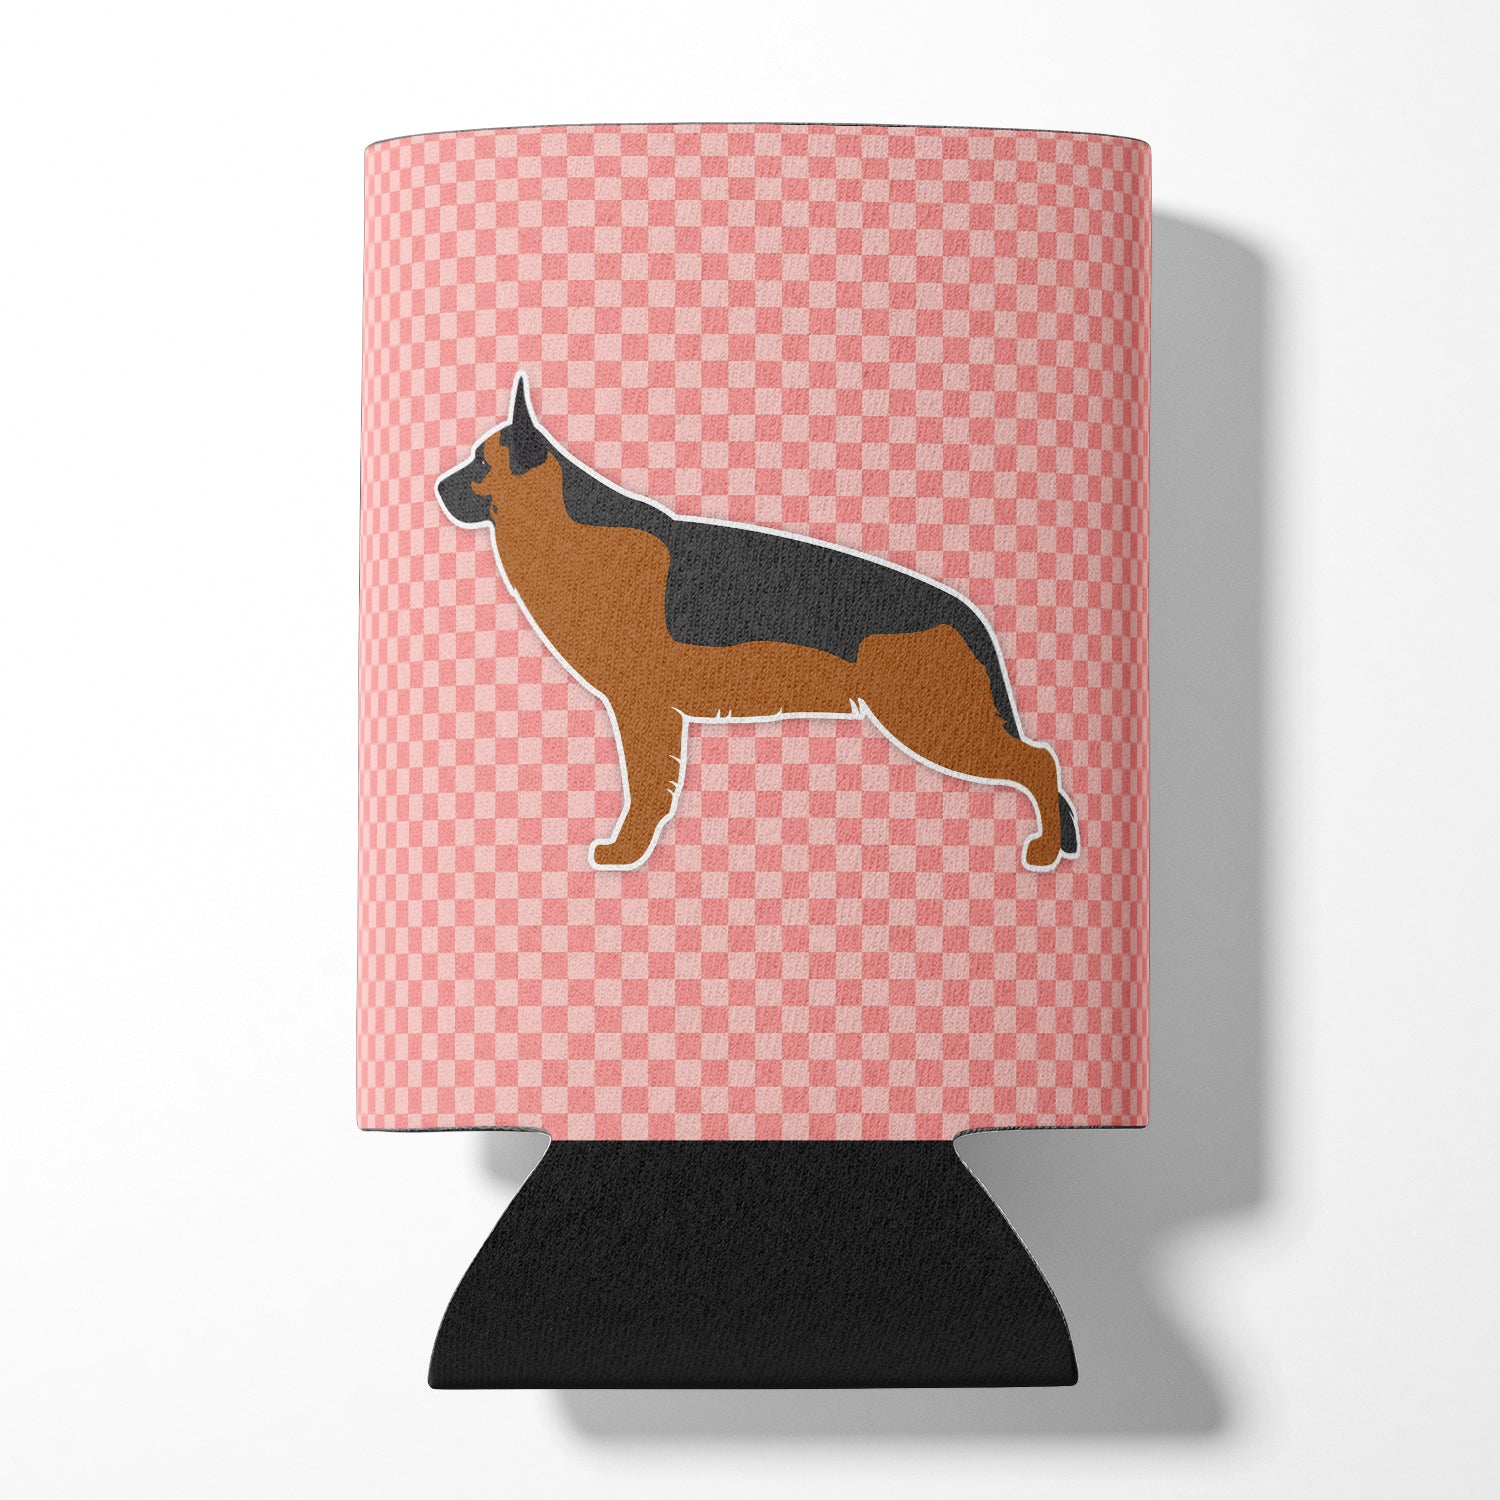 German Shepherd Checkerboard Pink Can or Bottle Hugger BB3624CC  the-store.com.